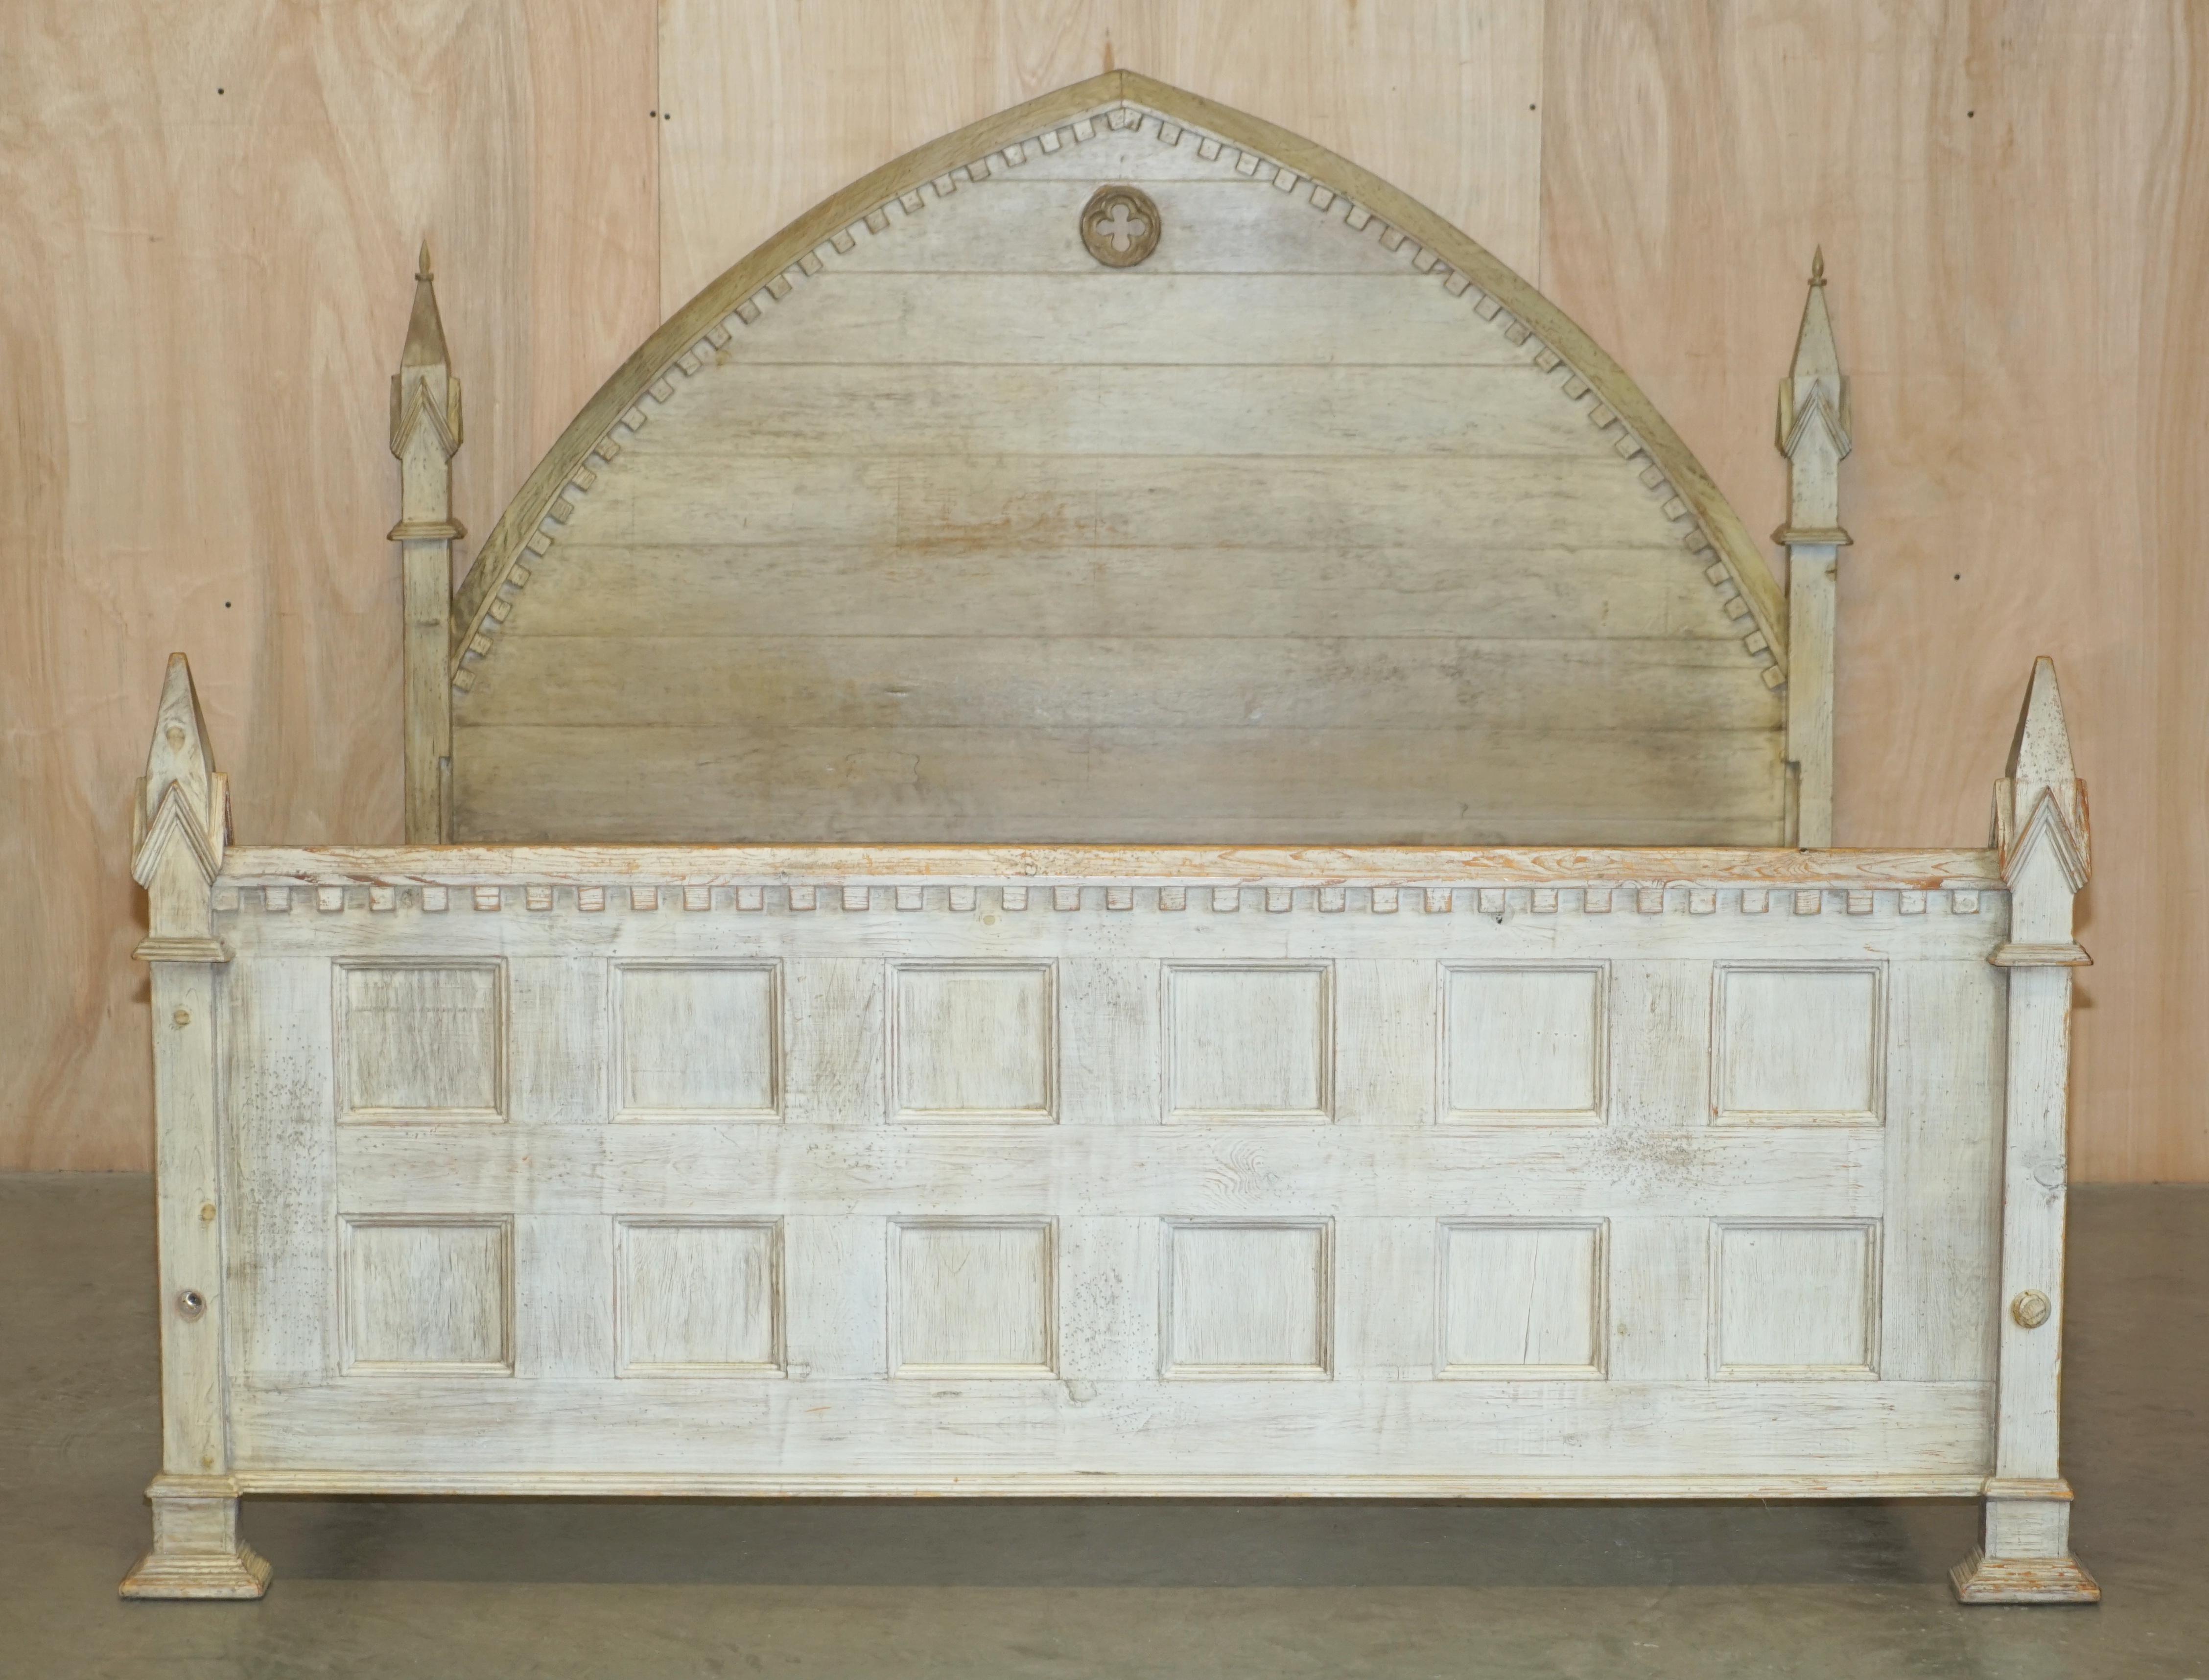 Royal House Antiques

Royal House Antiques is delighted to offer for sale this lovely Gothic Revival Limed Oak Super King size bed frame

Please note the delivery fee listed is just a guide, it covers within the M25 only for the UK and local Europe